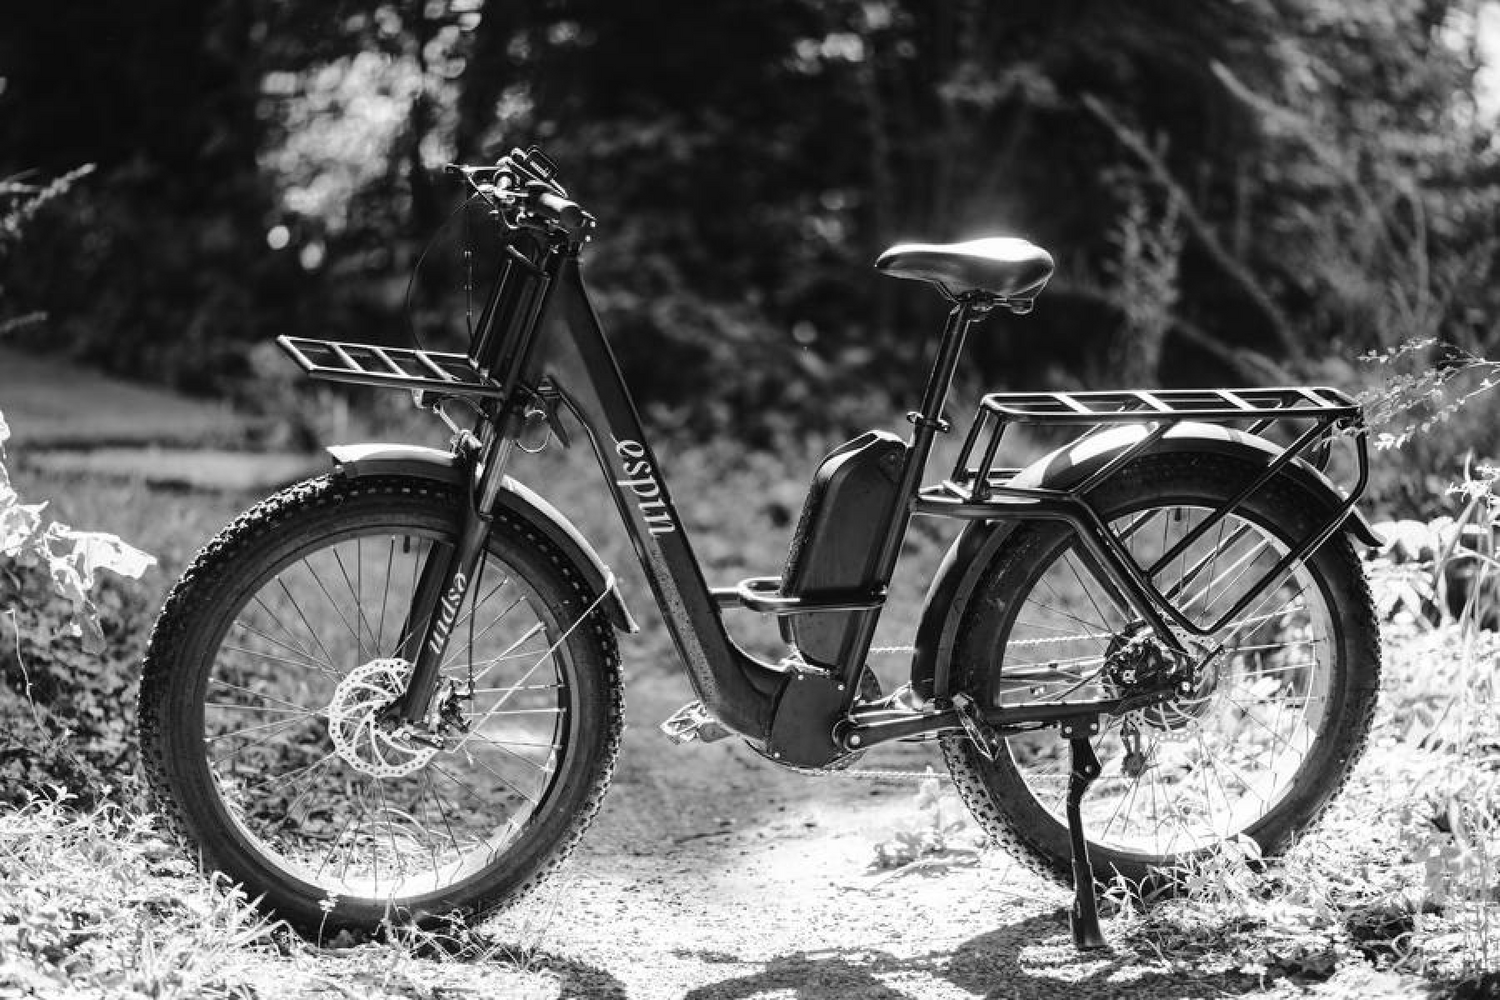 Choosing Sustainability - What to Expect With an Electric Bike